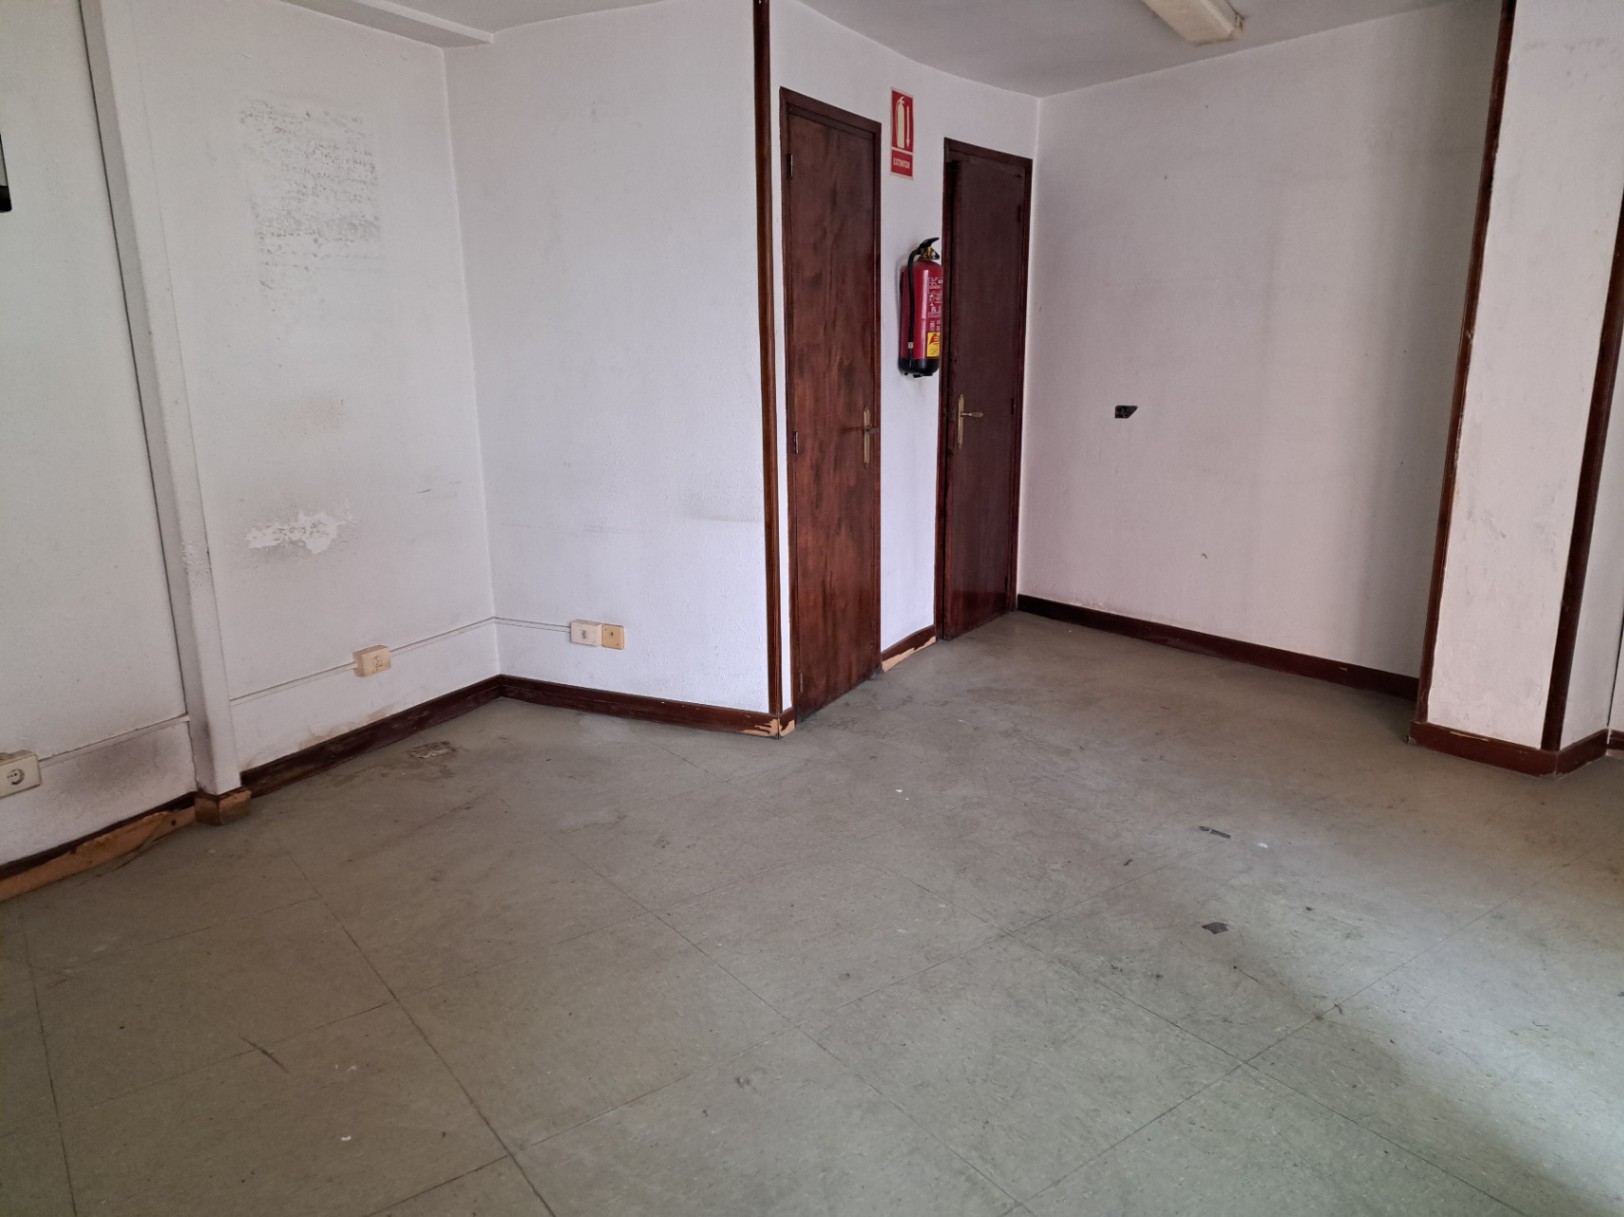 Commercial space for sale of 30 square meters with metal shutter